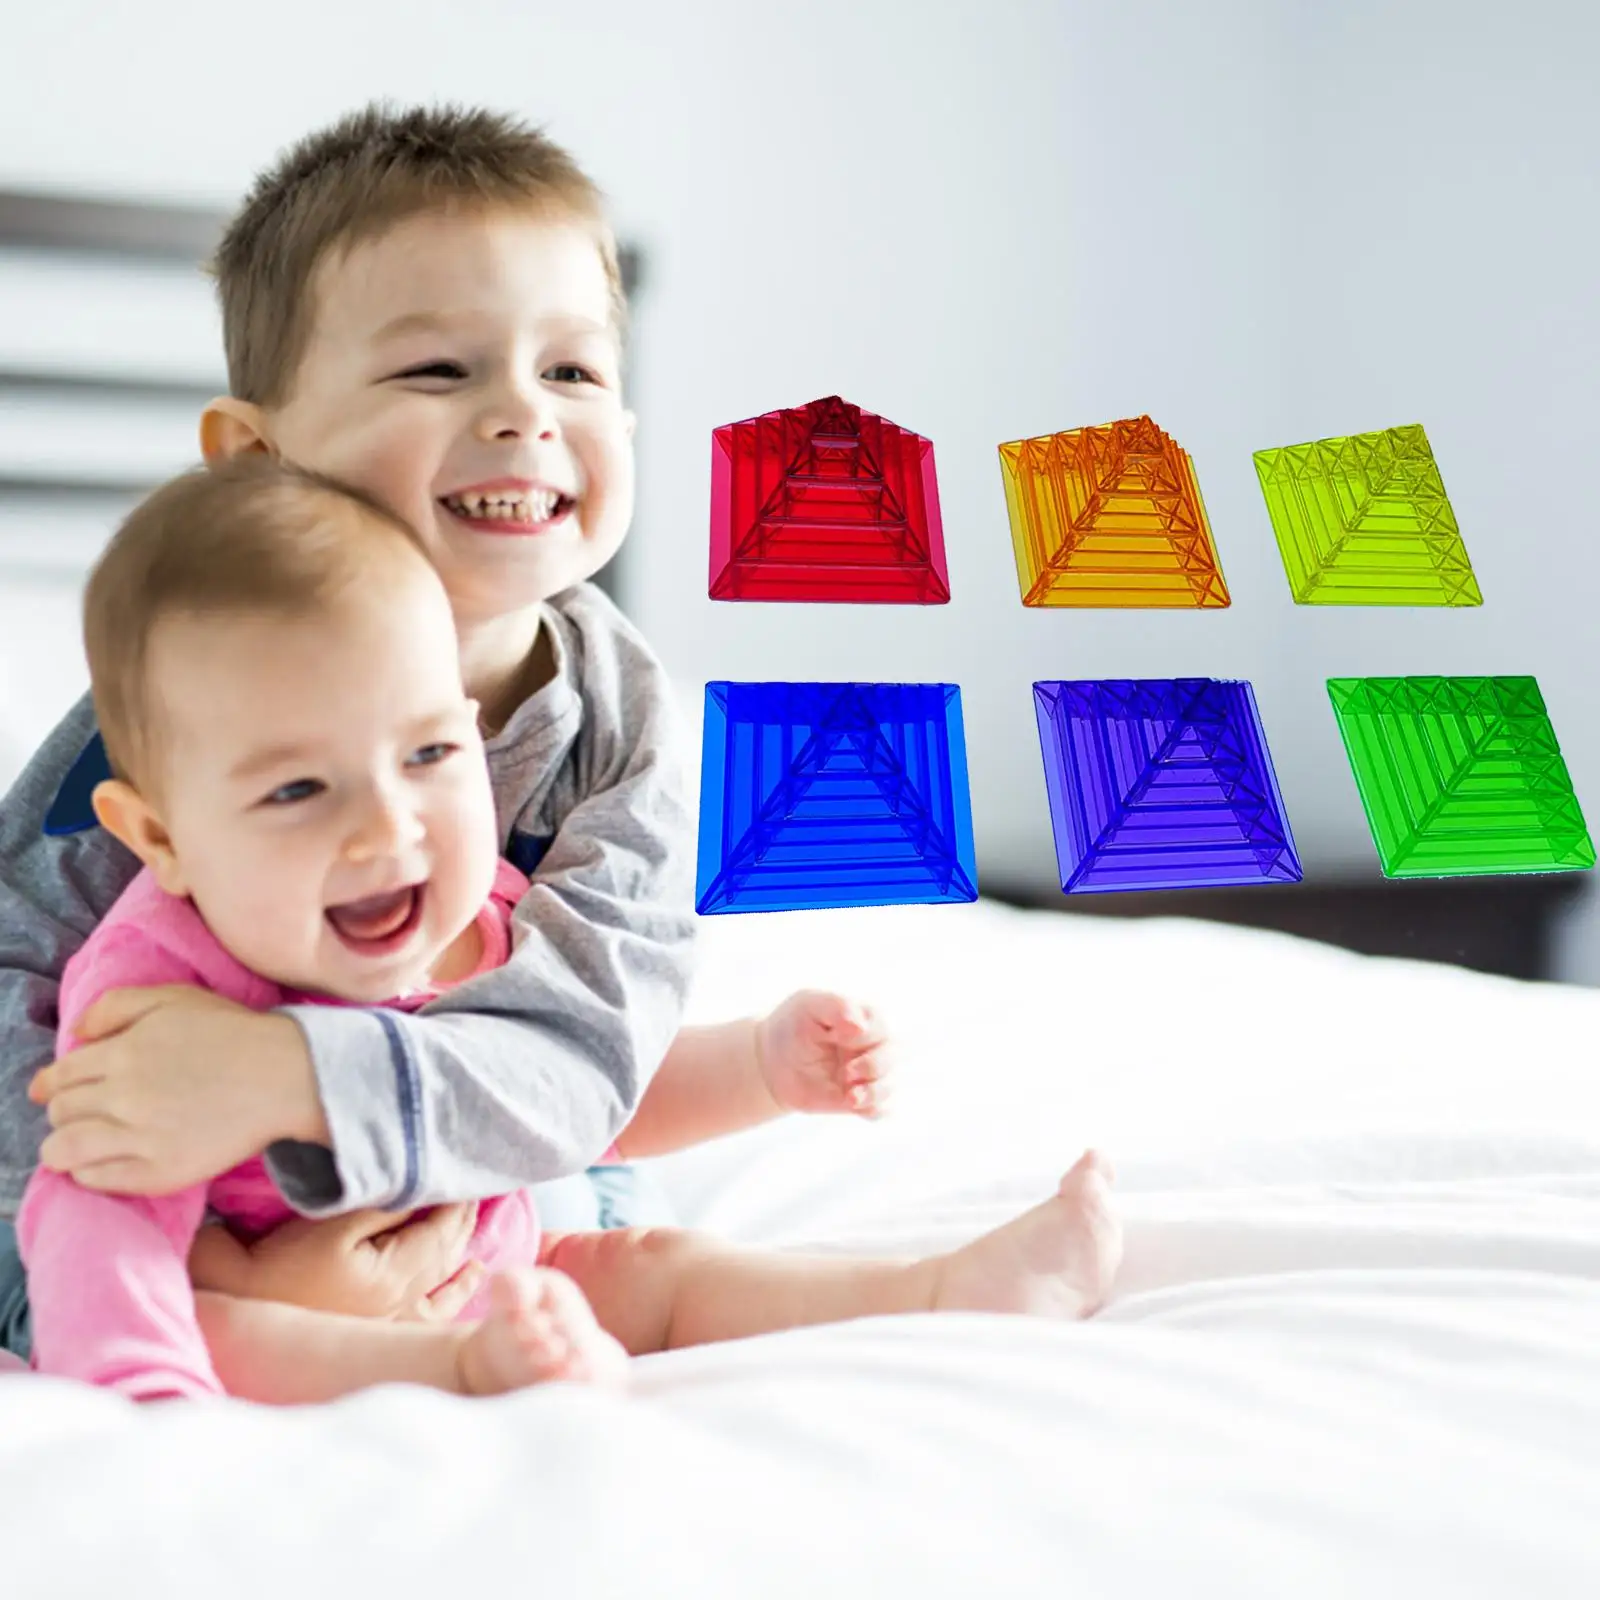 Educational Pyramid  Toys Puzzles Colorful Stacking  Montessori Building Fun ABS Diamond Blocks Balancing   for Toddler